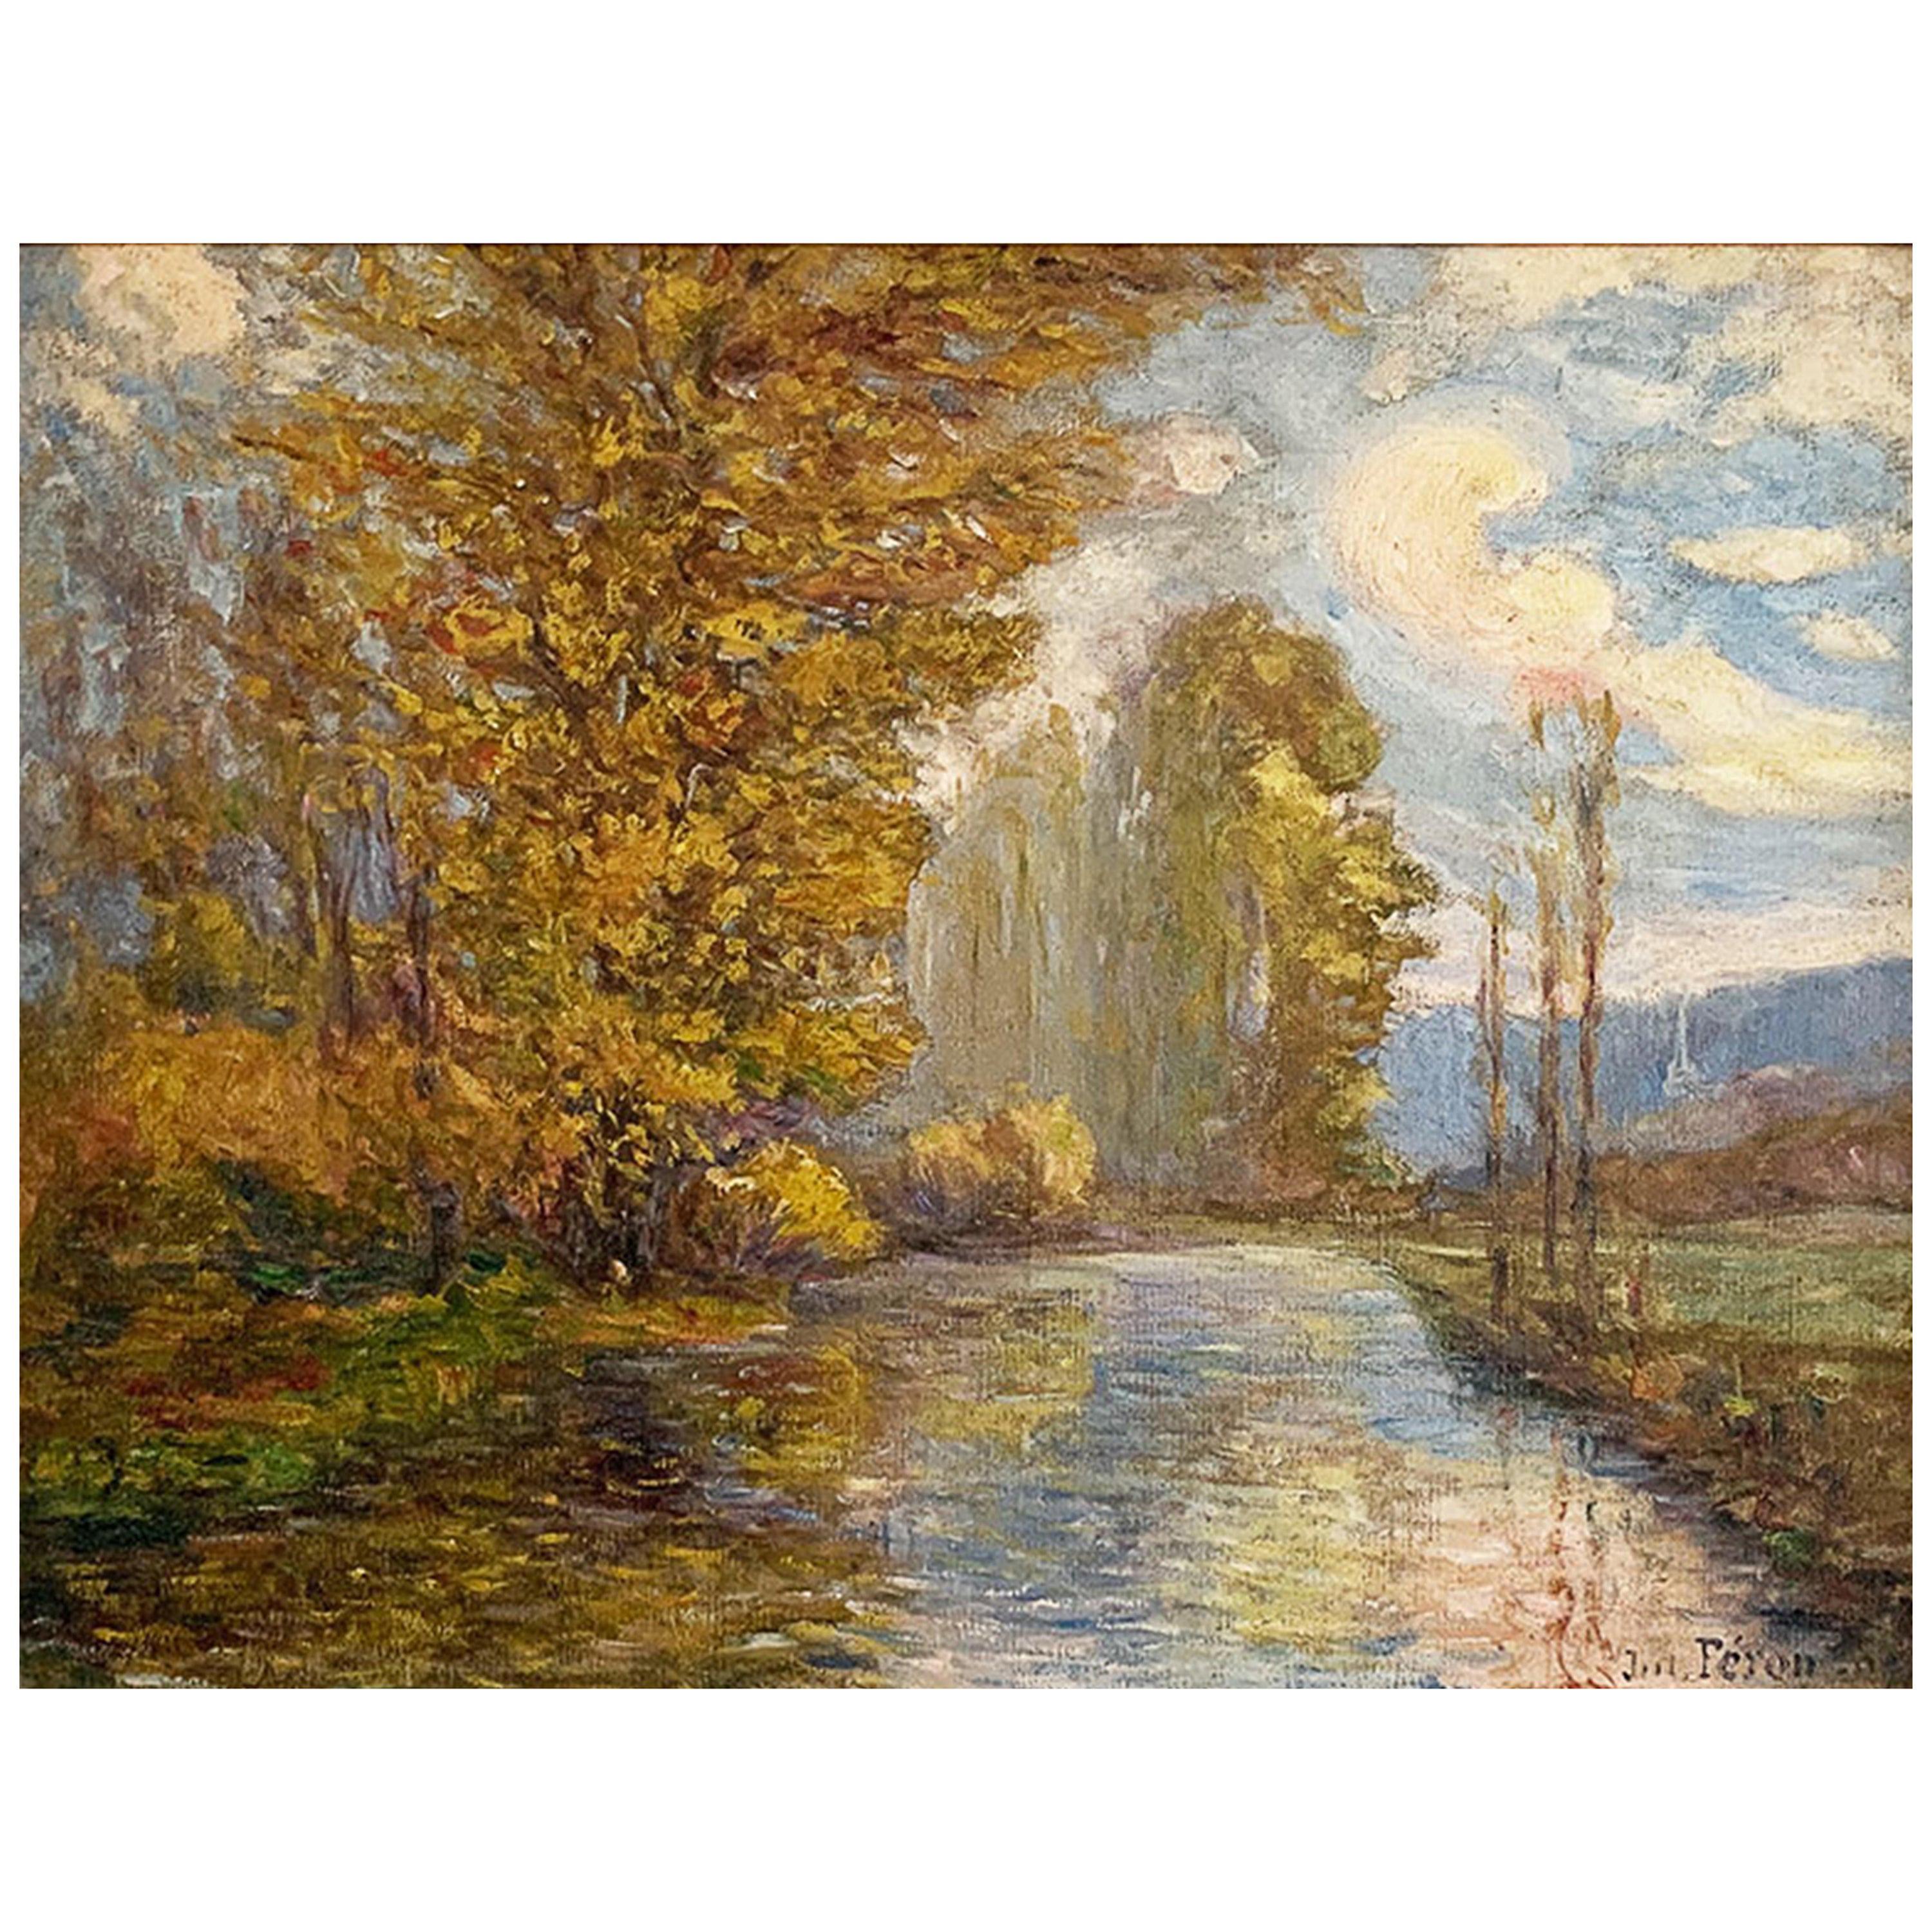 Feron Julien Hippolyte '1864-1944' "Edge of a river in Andelys" For Sale